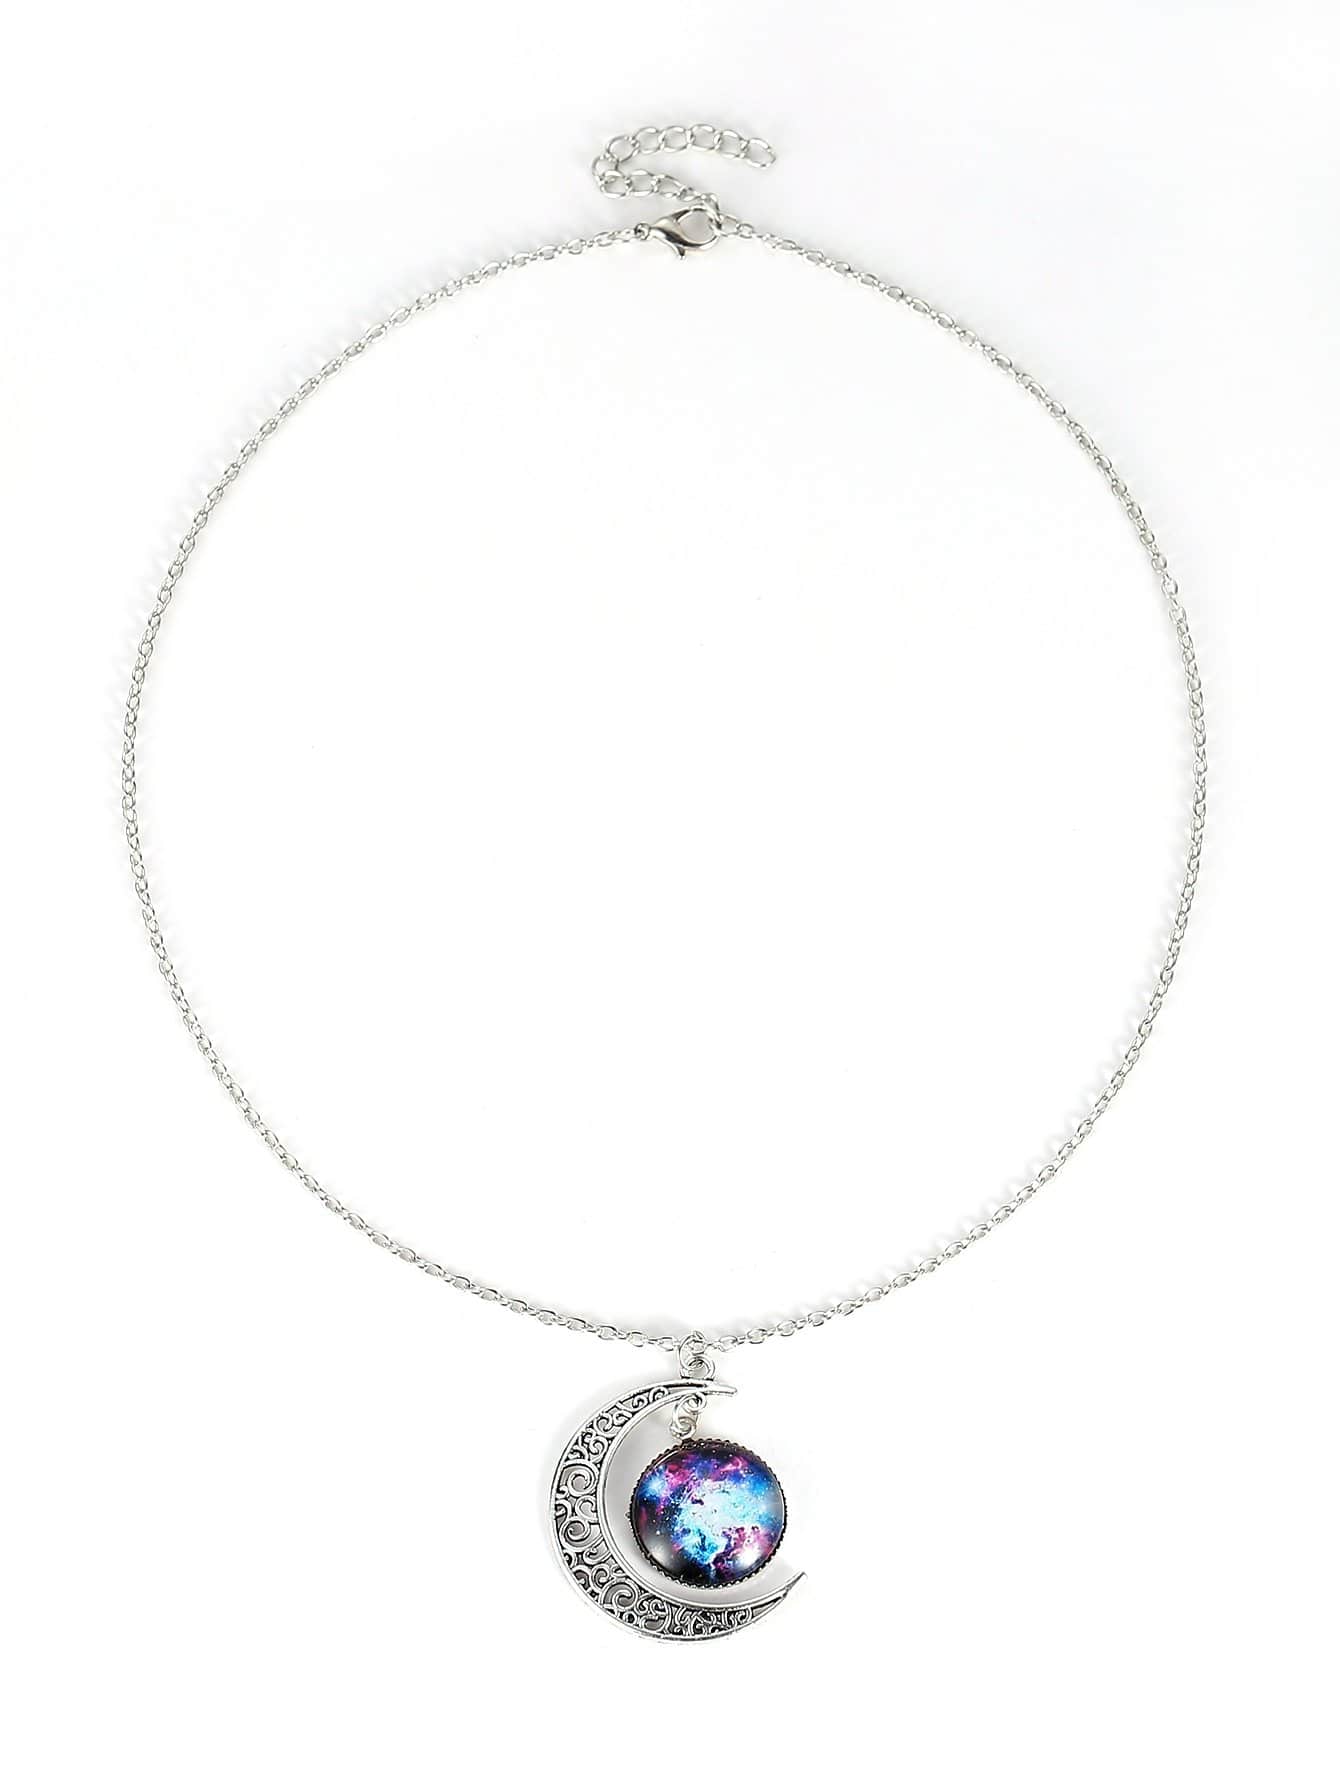 MsDressly Necklaces Star Sky Round & Moon Pendant Necklace